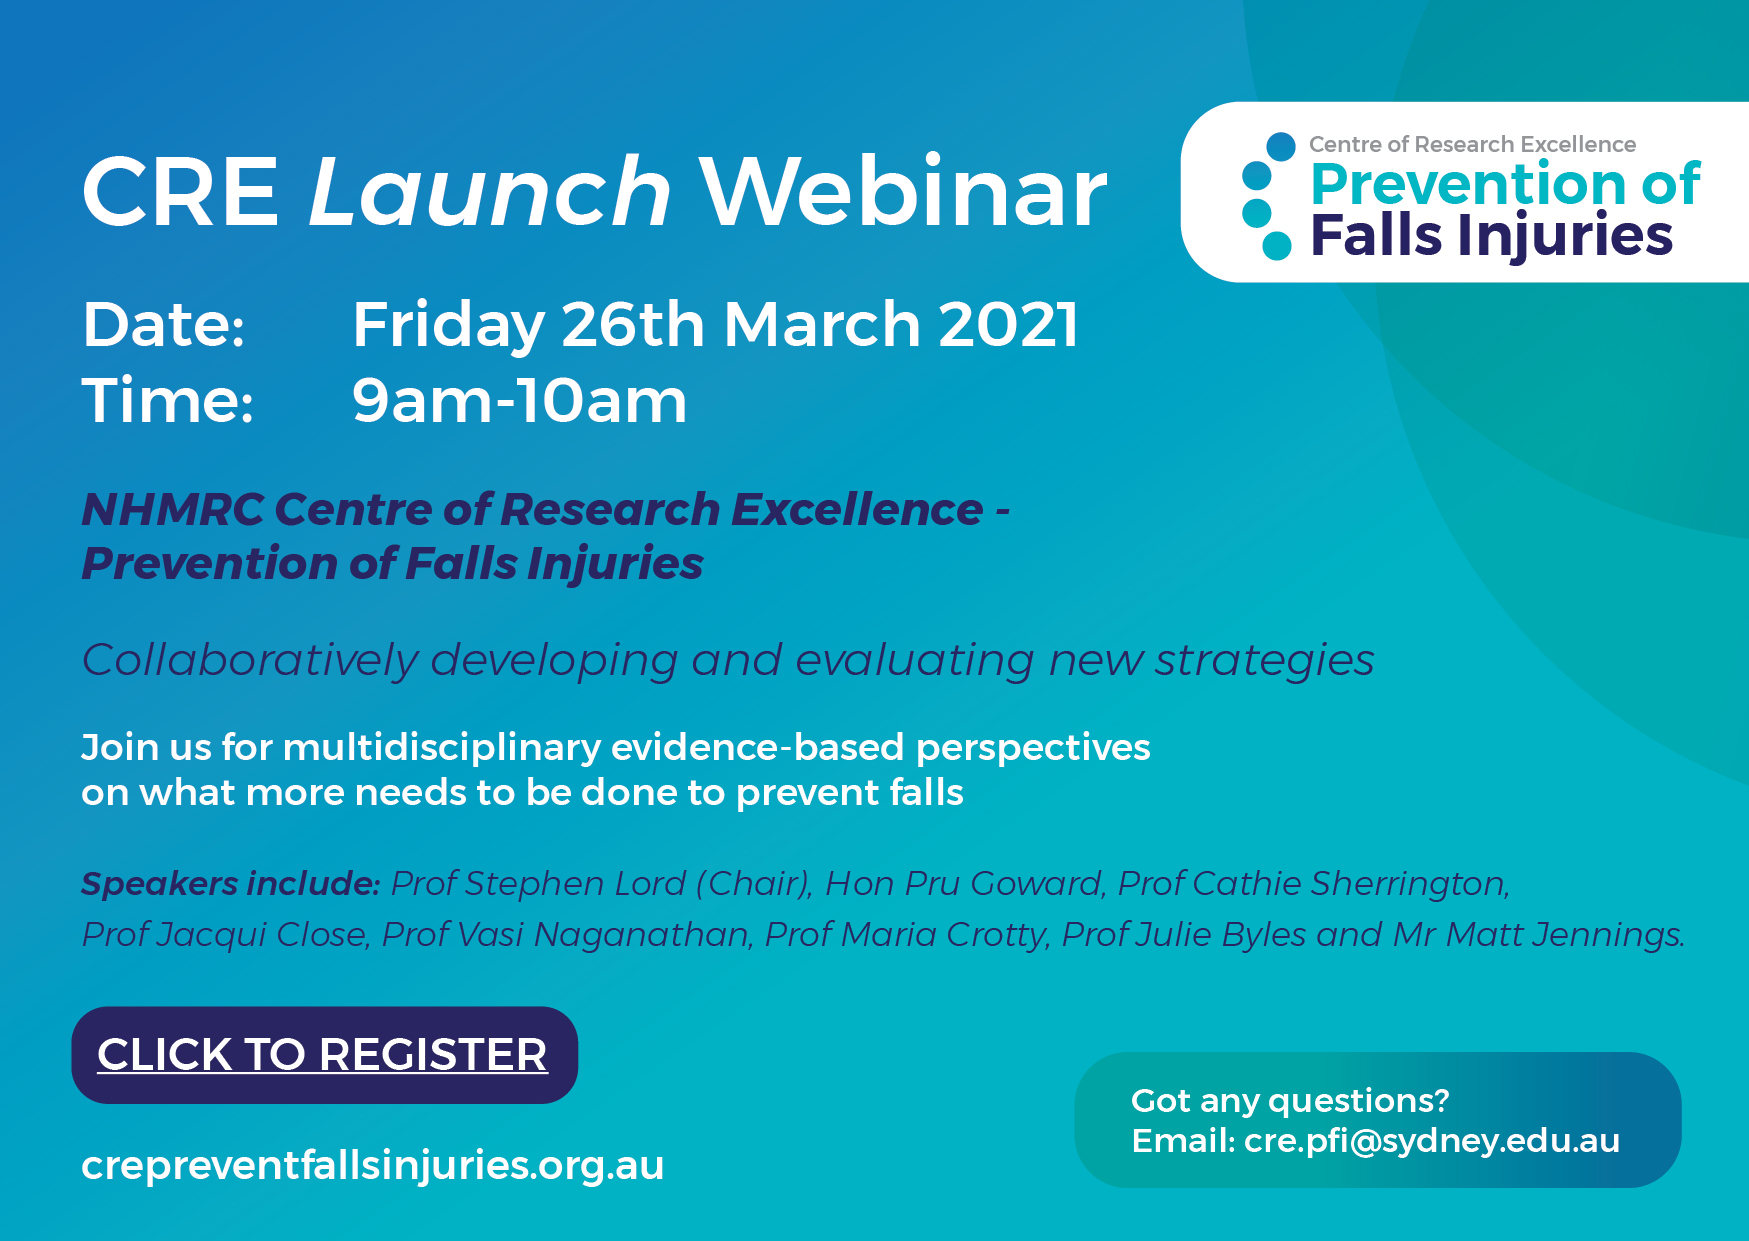 CRE Launch Webinar Friday 26th March 2021 9-10am AEDT